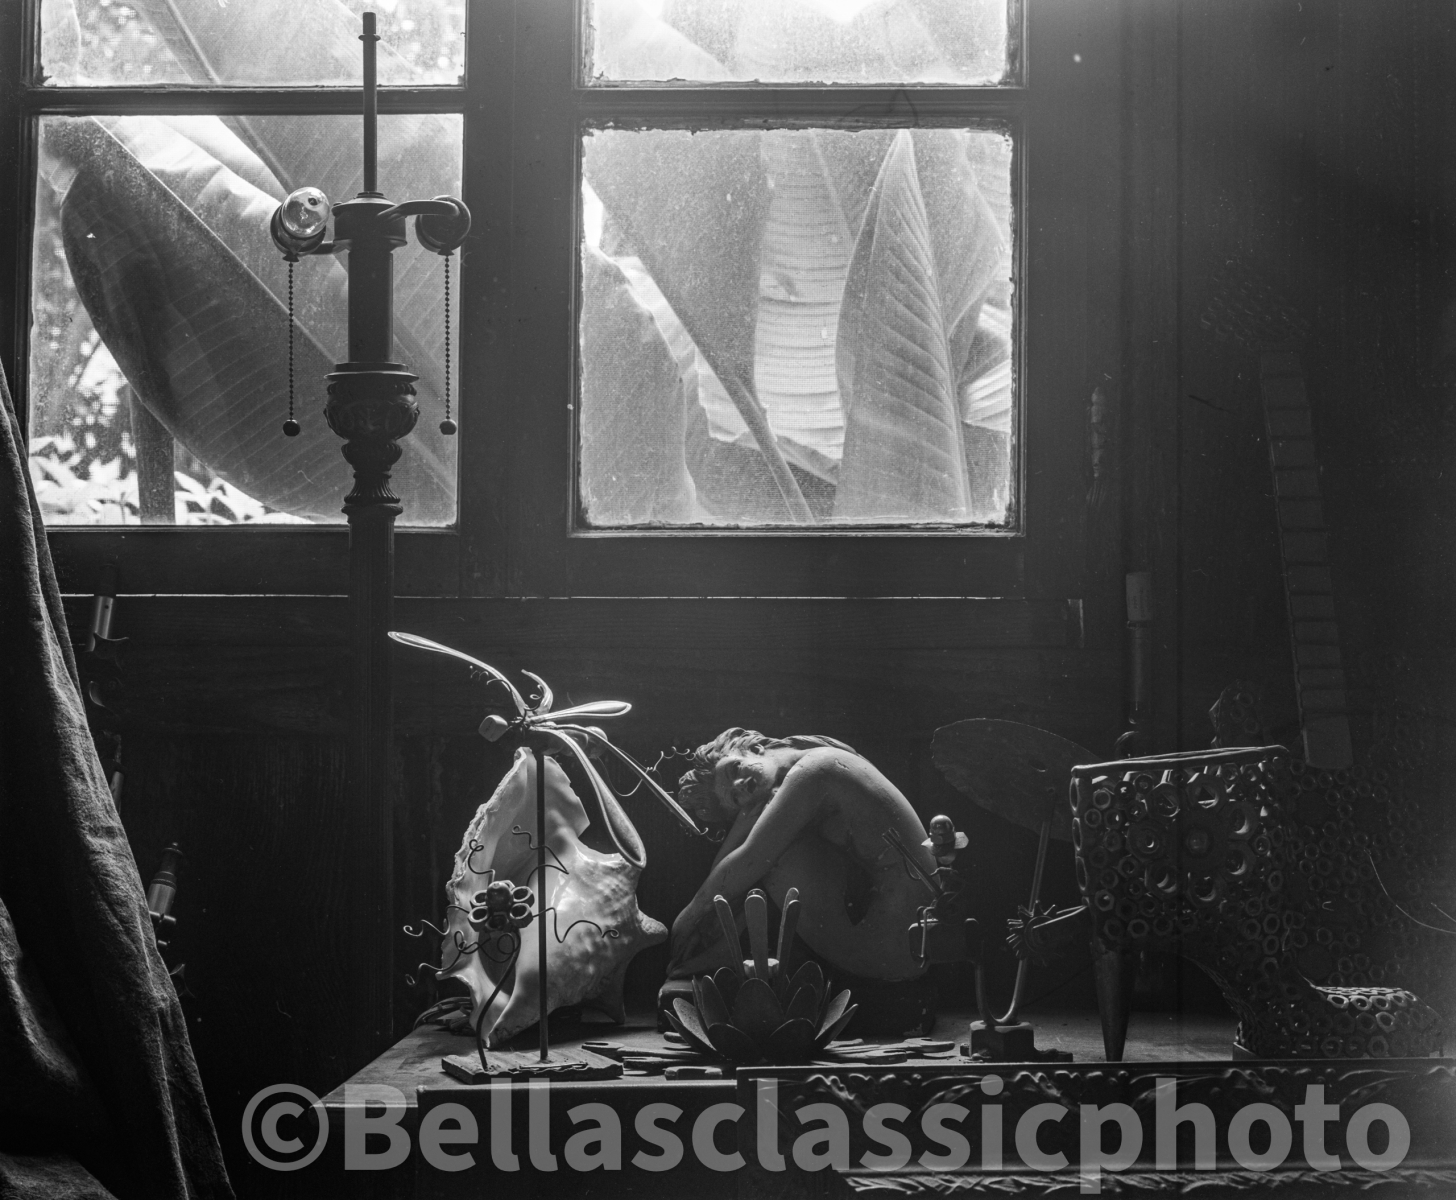  : Film Photography : Bella's Classic Photography